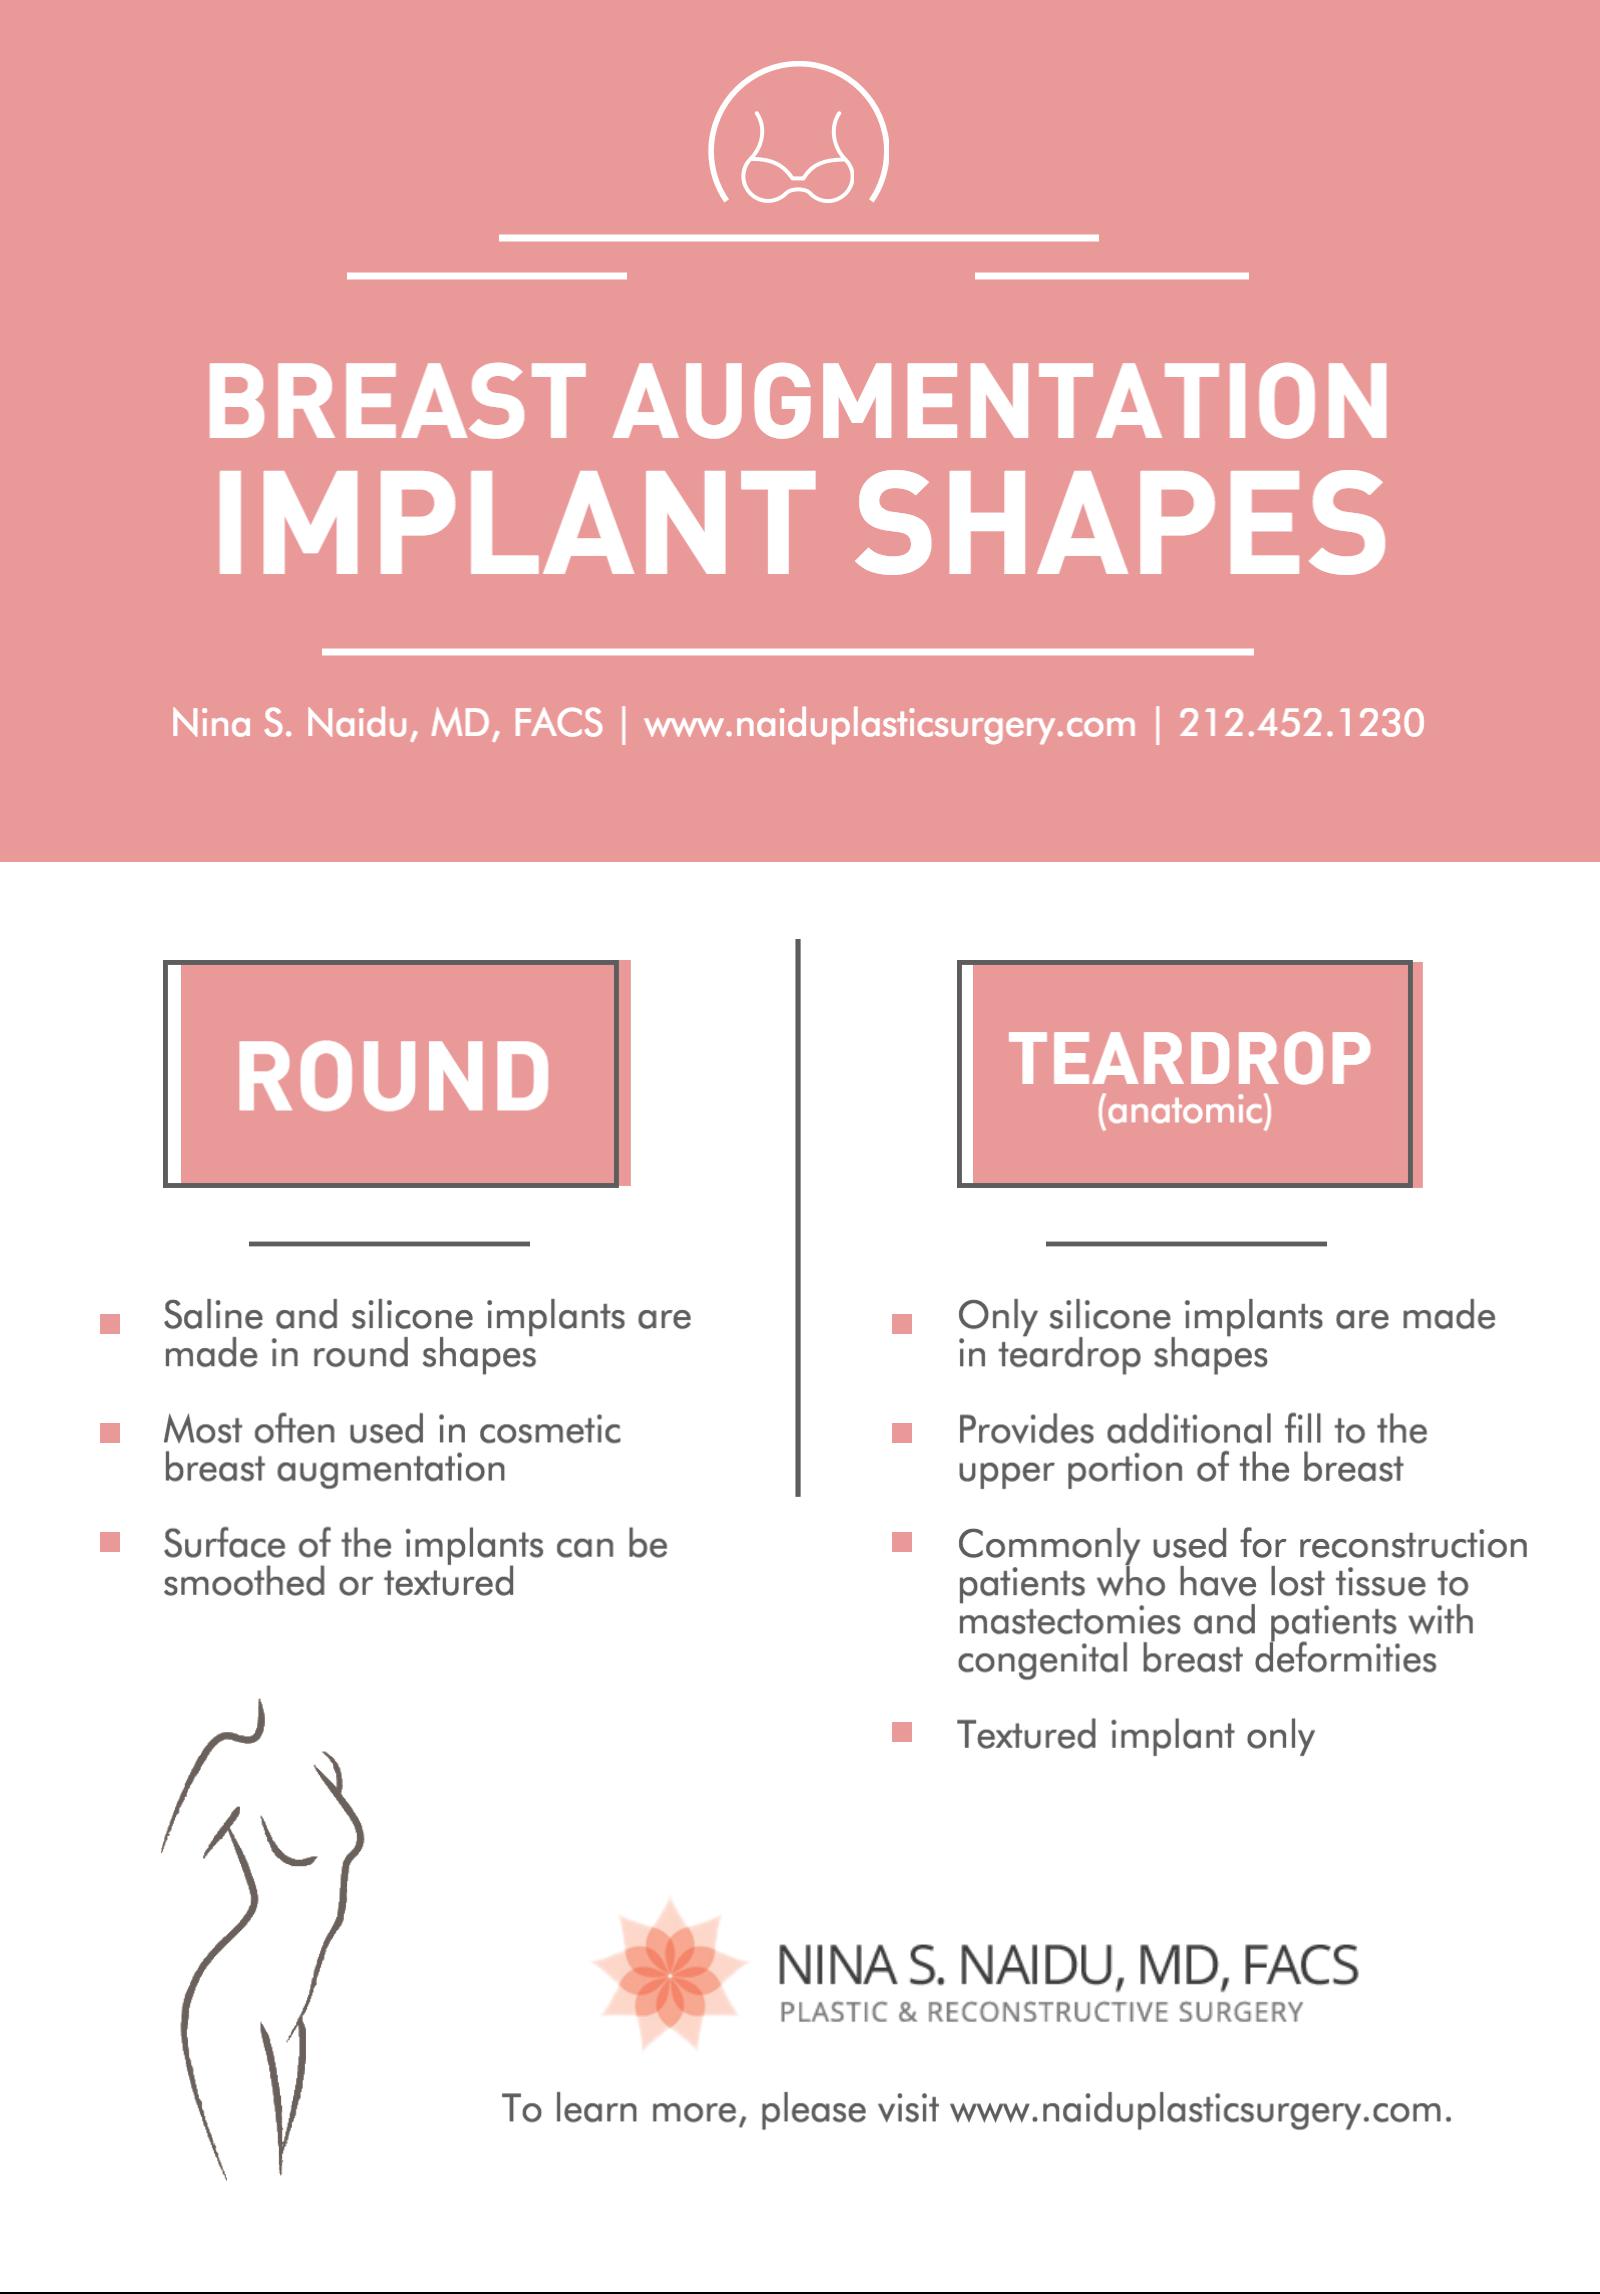 Is There a Difference Between Shaped & Round Implants